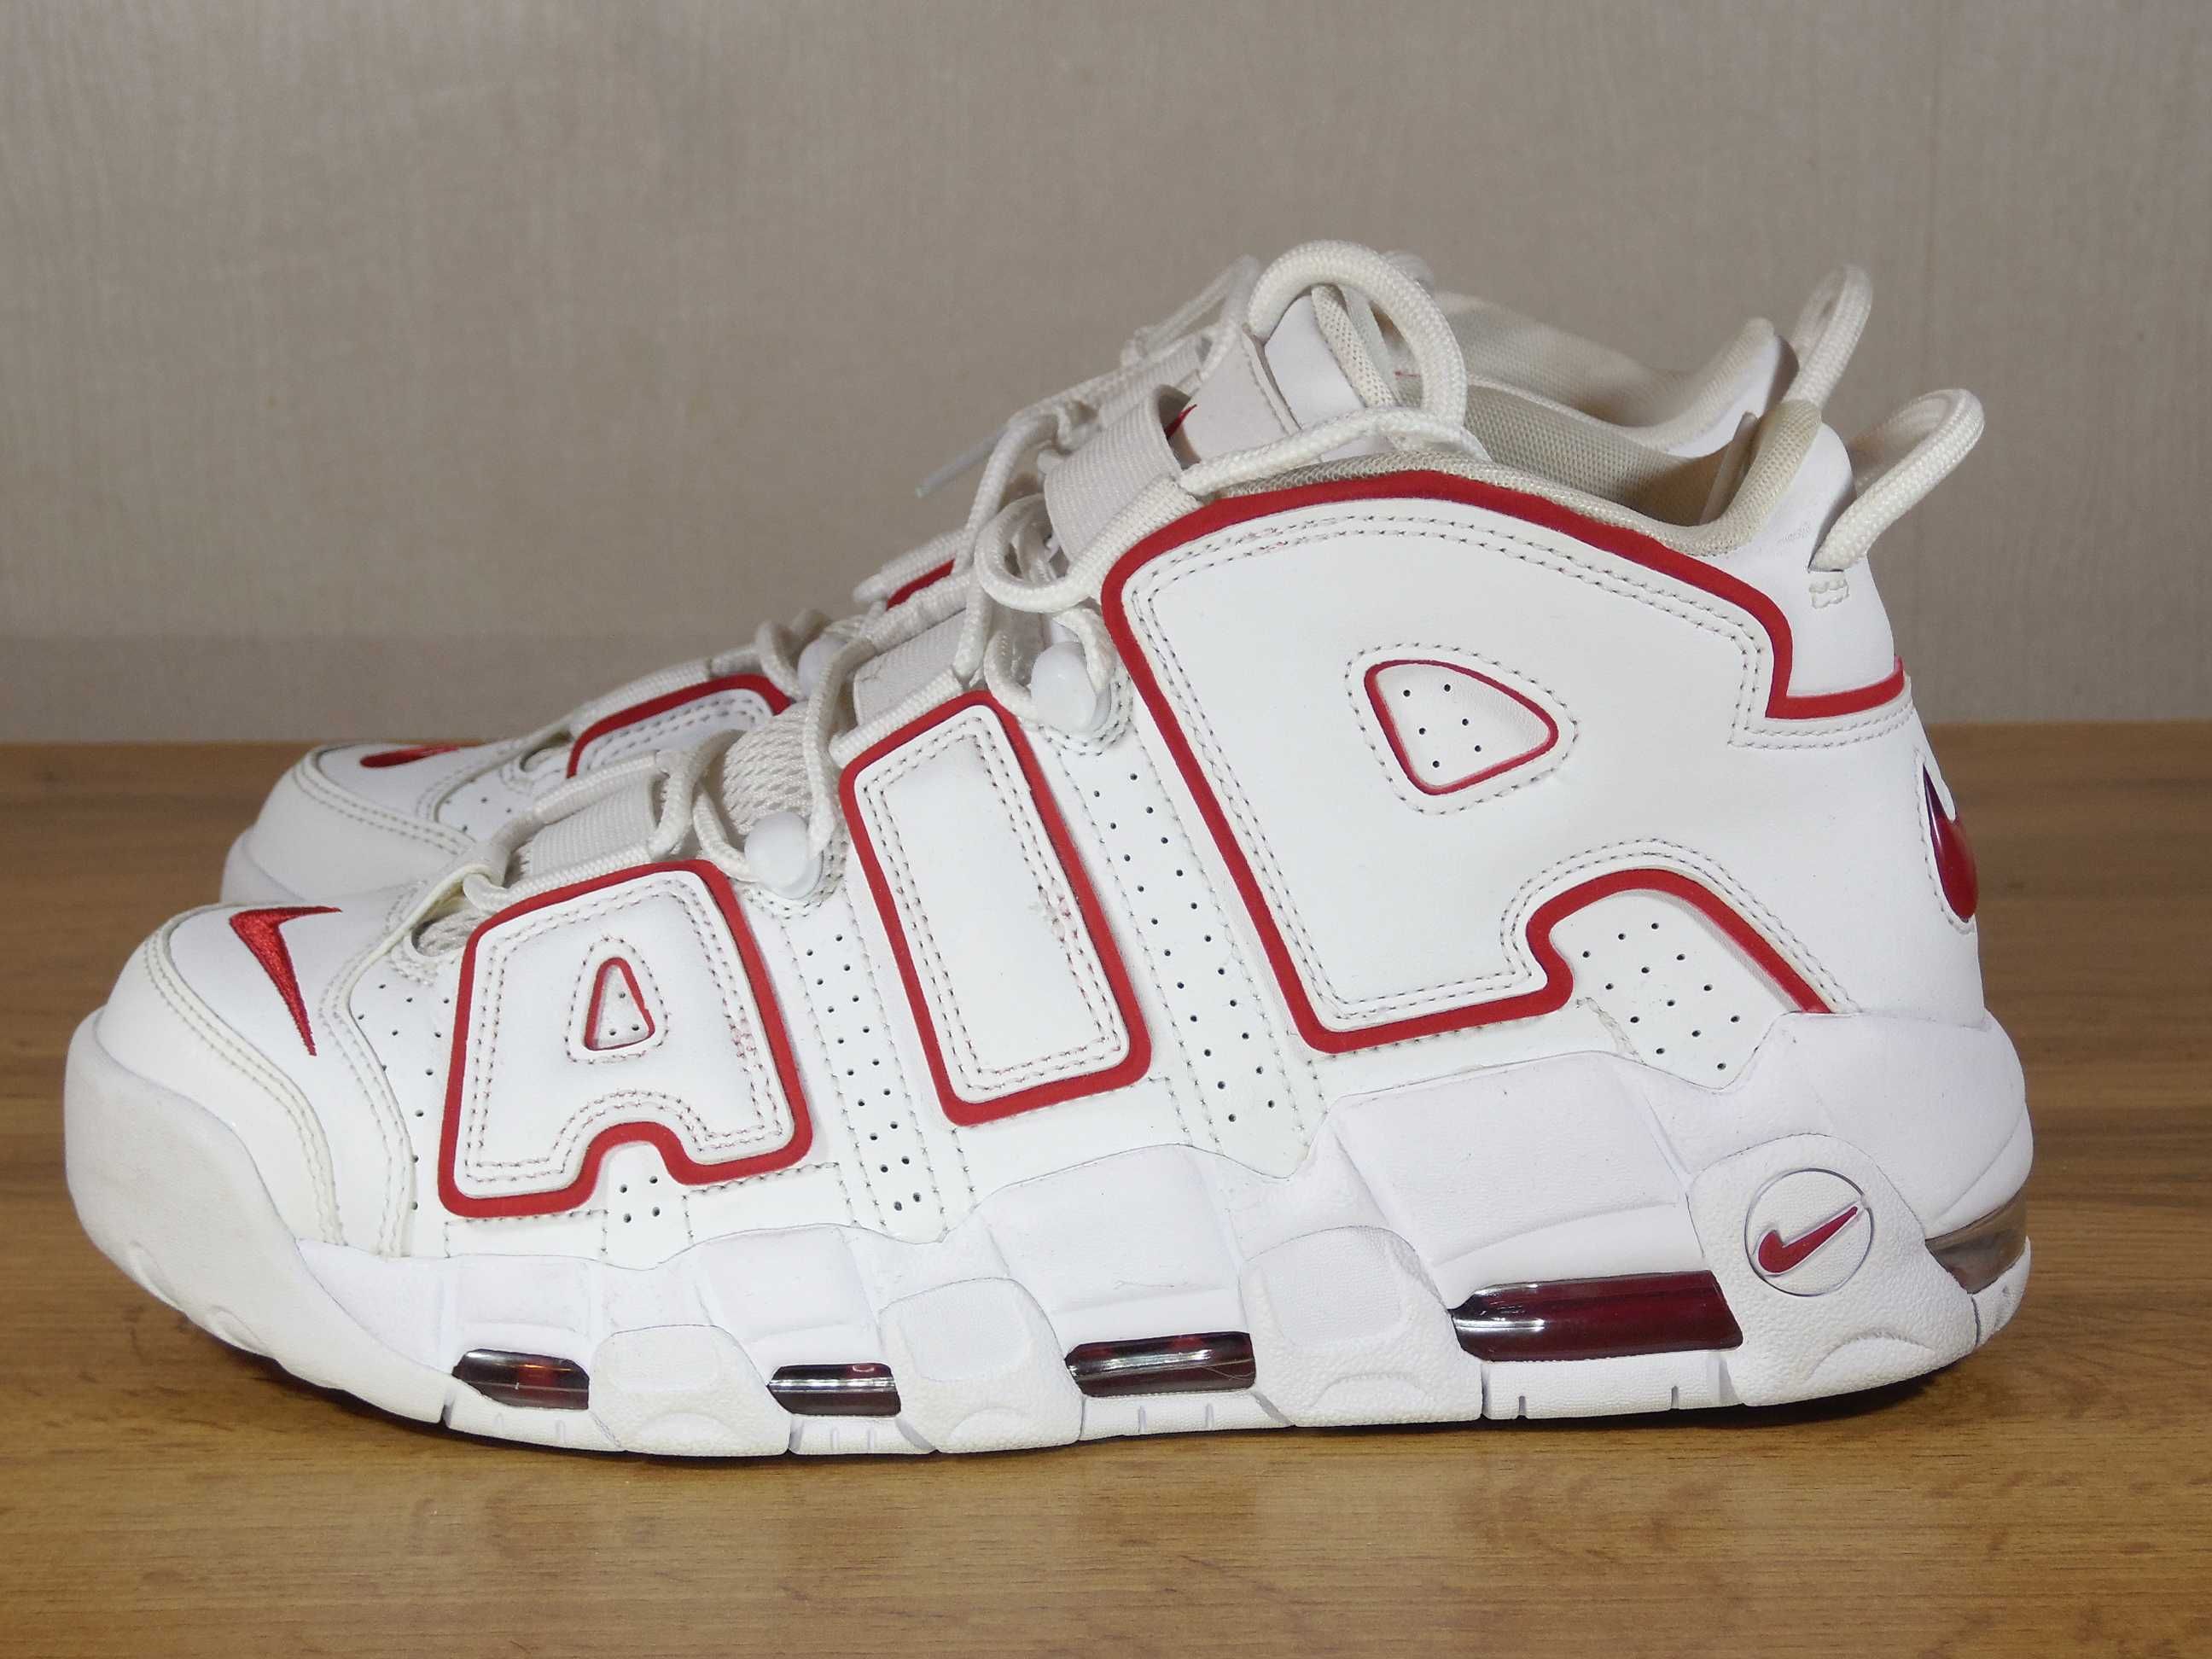 Nike Air More Uptempo White Varsity Red - 41 номер Оригинални!